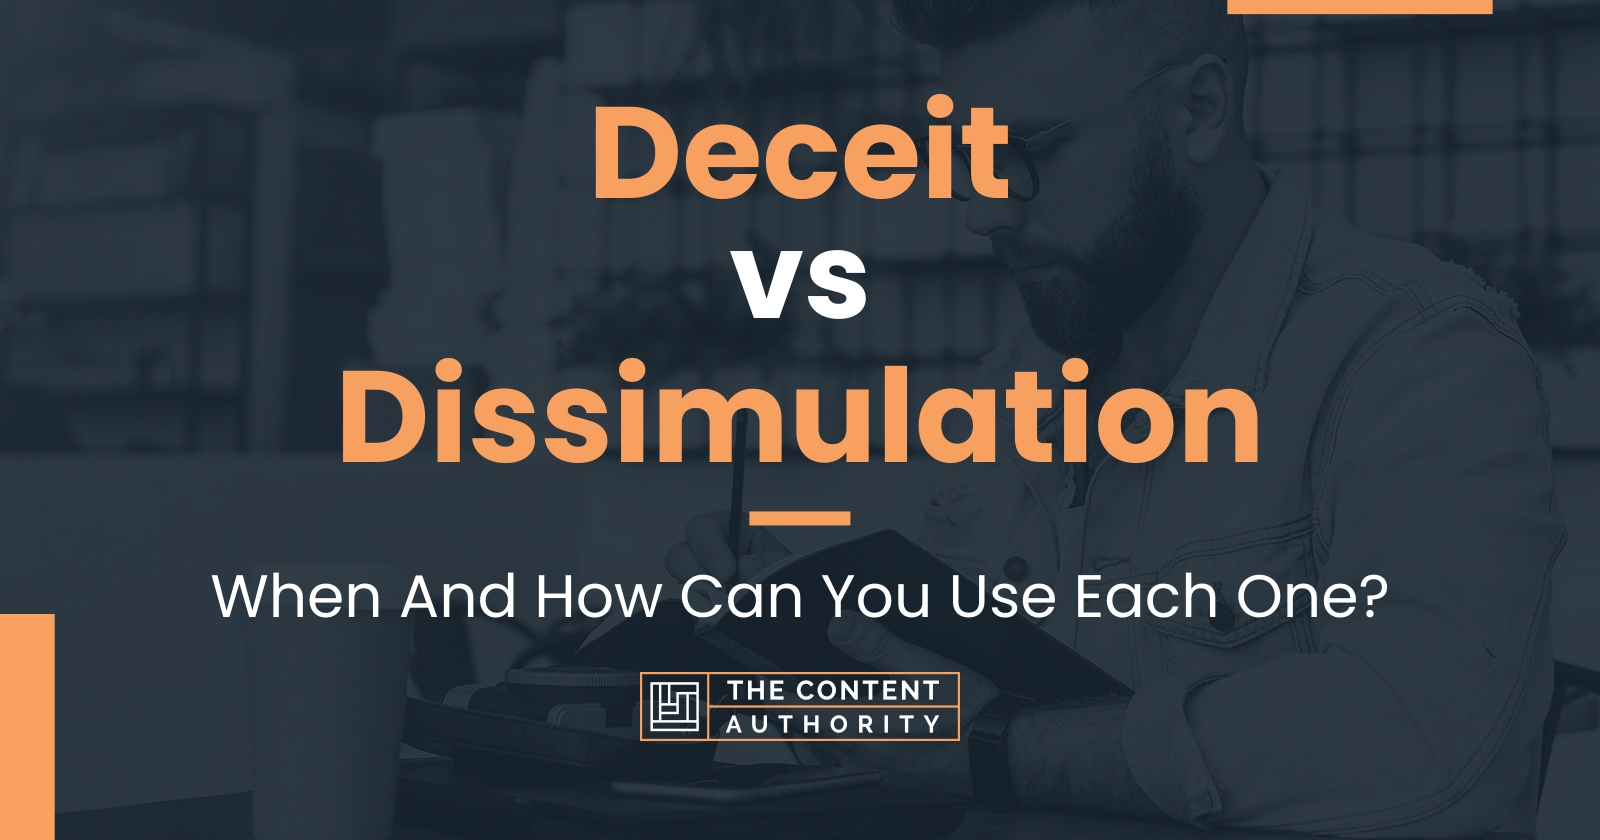 Deceit vs Dissimulation: When And How Can You Use Each One?